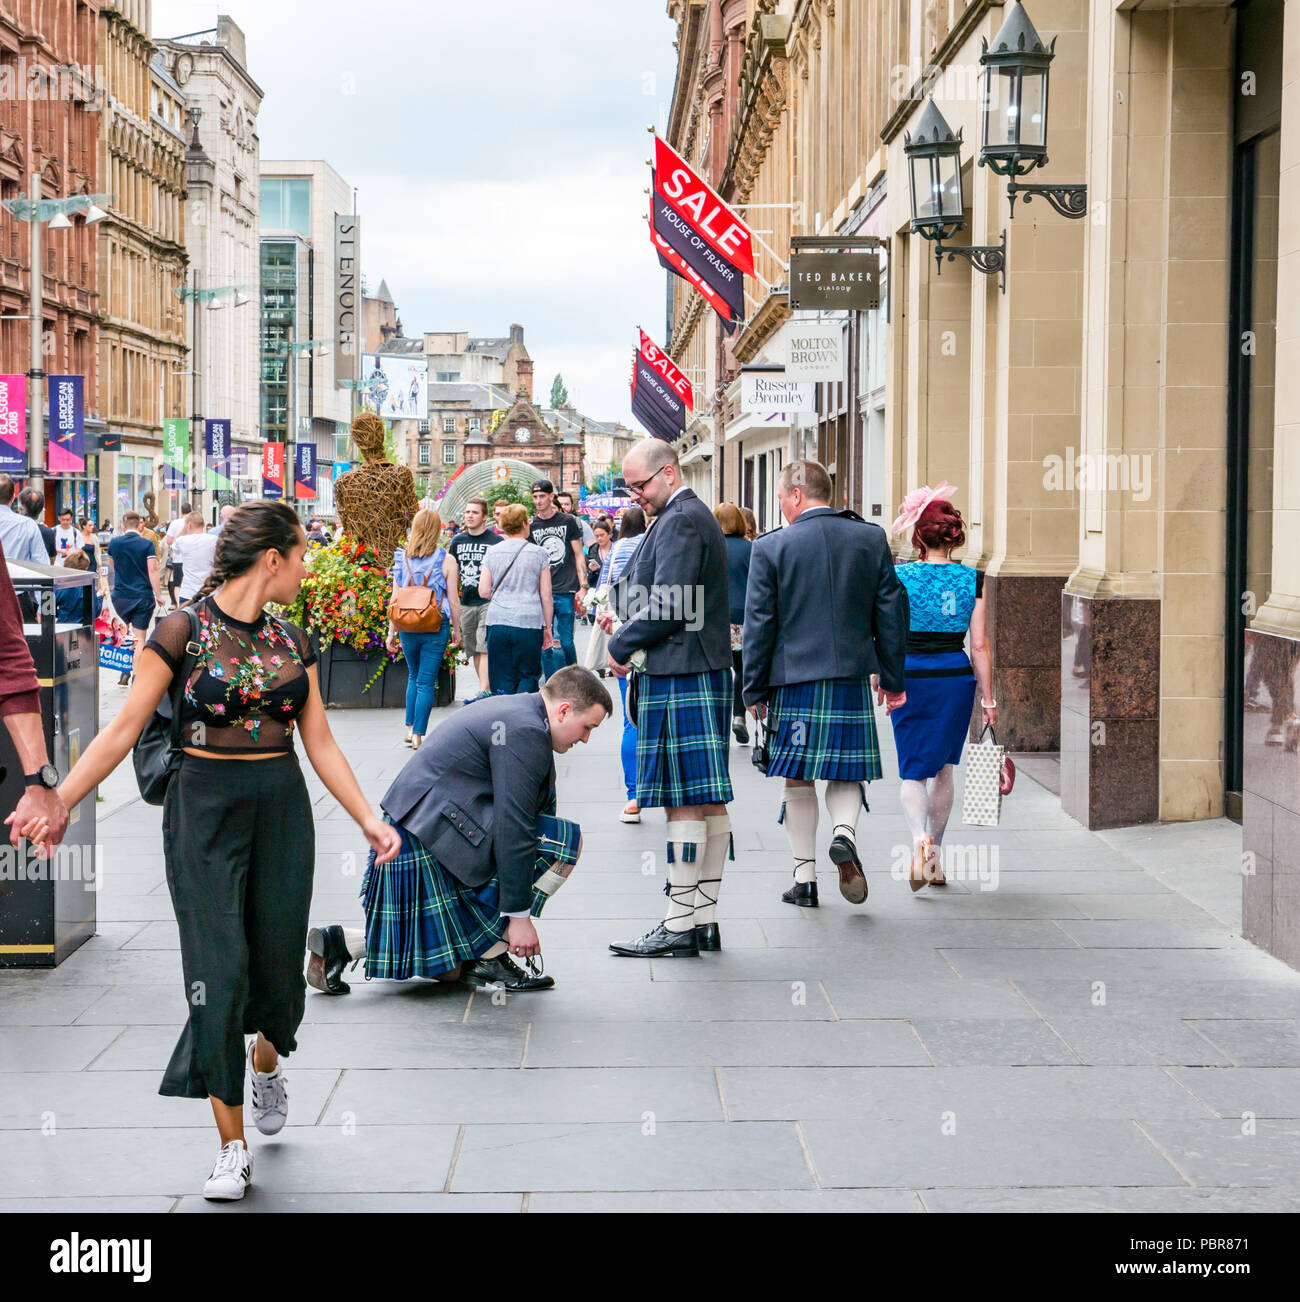 People dressed for wedding with men in kilts stopping to tie shoelace and young woman turning head, Buchanan Street, Glasgow, Scotland, UK Stock Photo